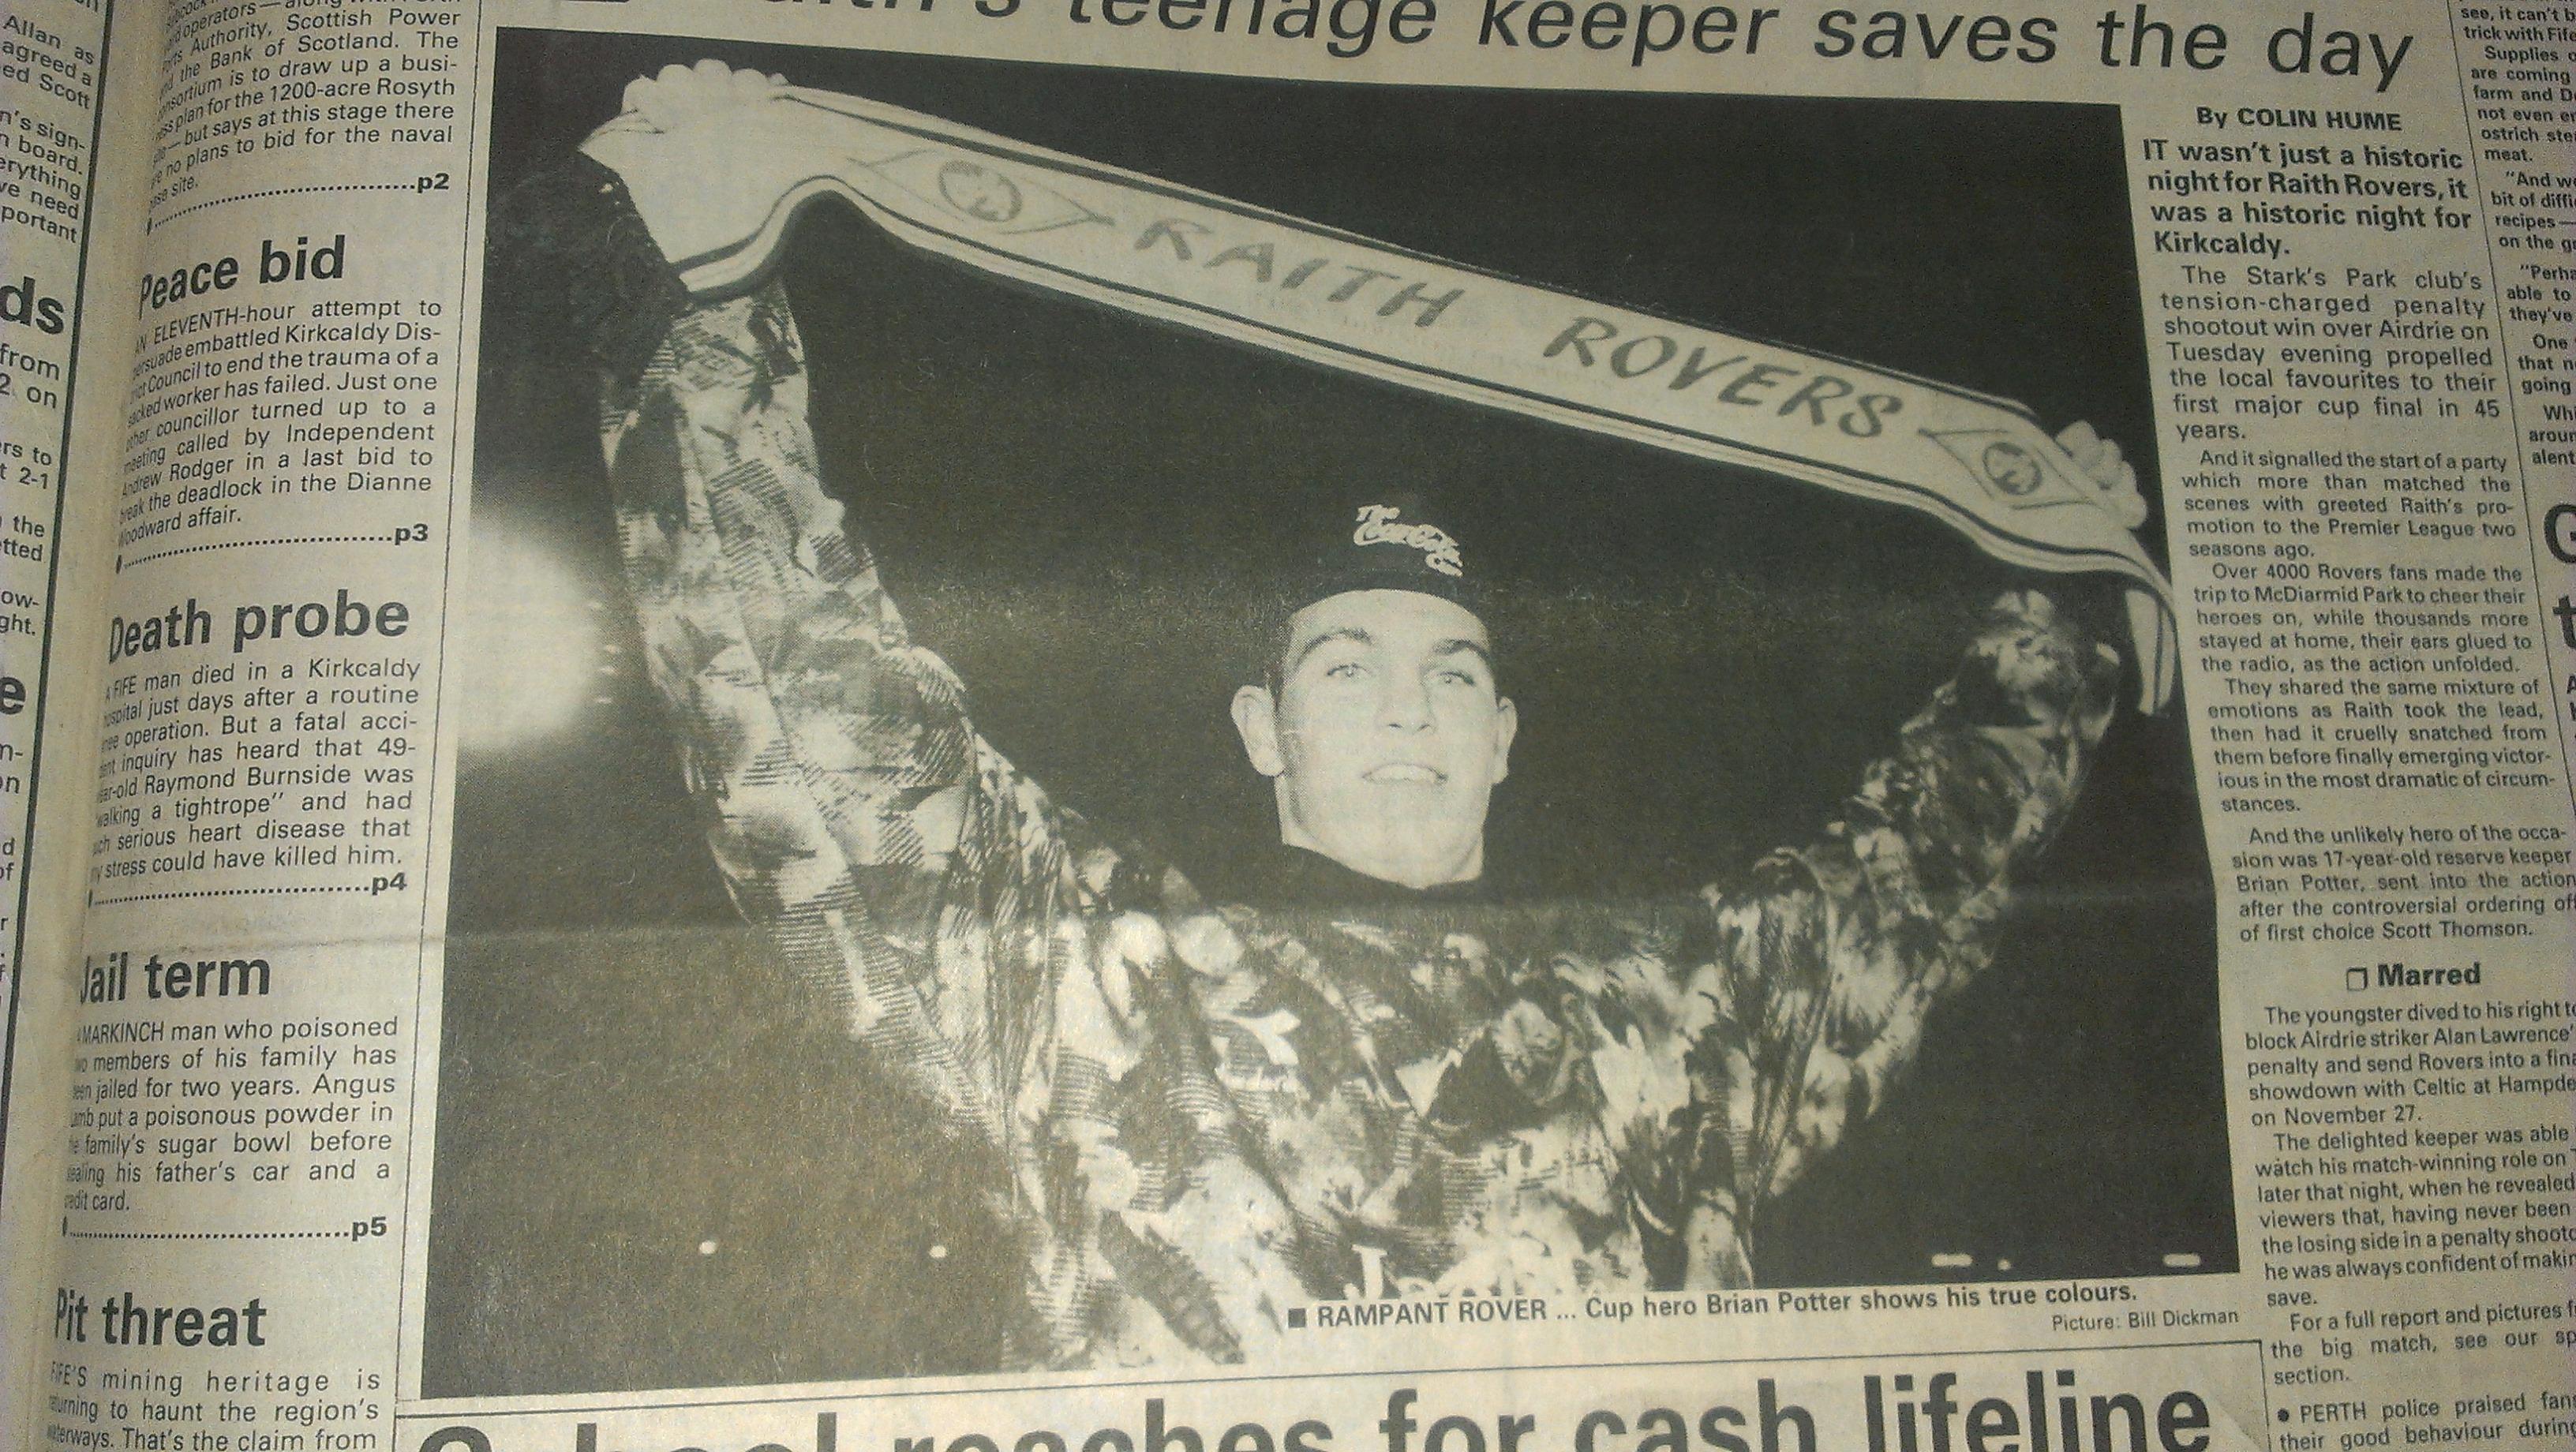 Raith Rovers Coca Cola Cup -  front page of the Fife Free Press after Brian Potter, substitute goalie, saved the penalty that took them to the cup final.